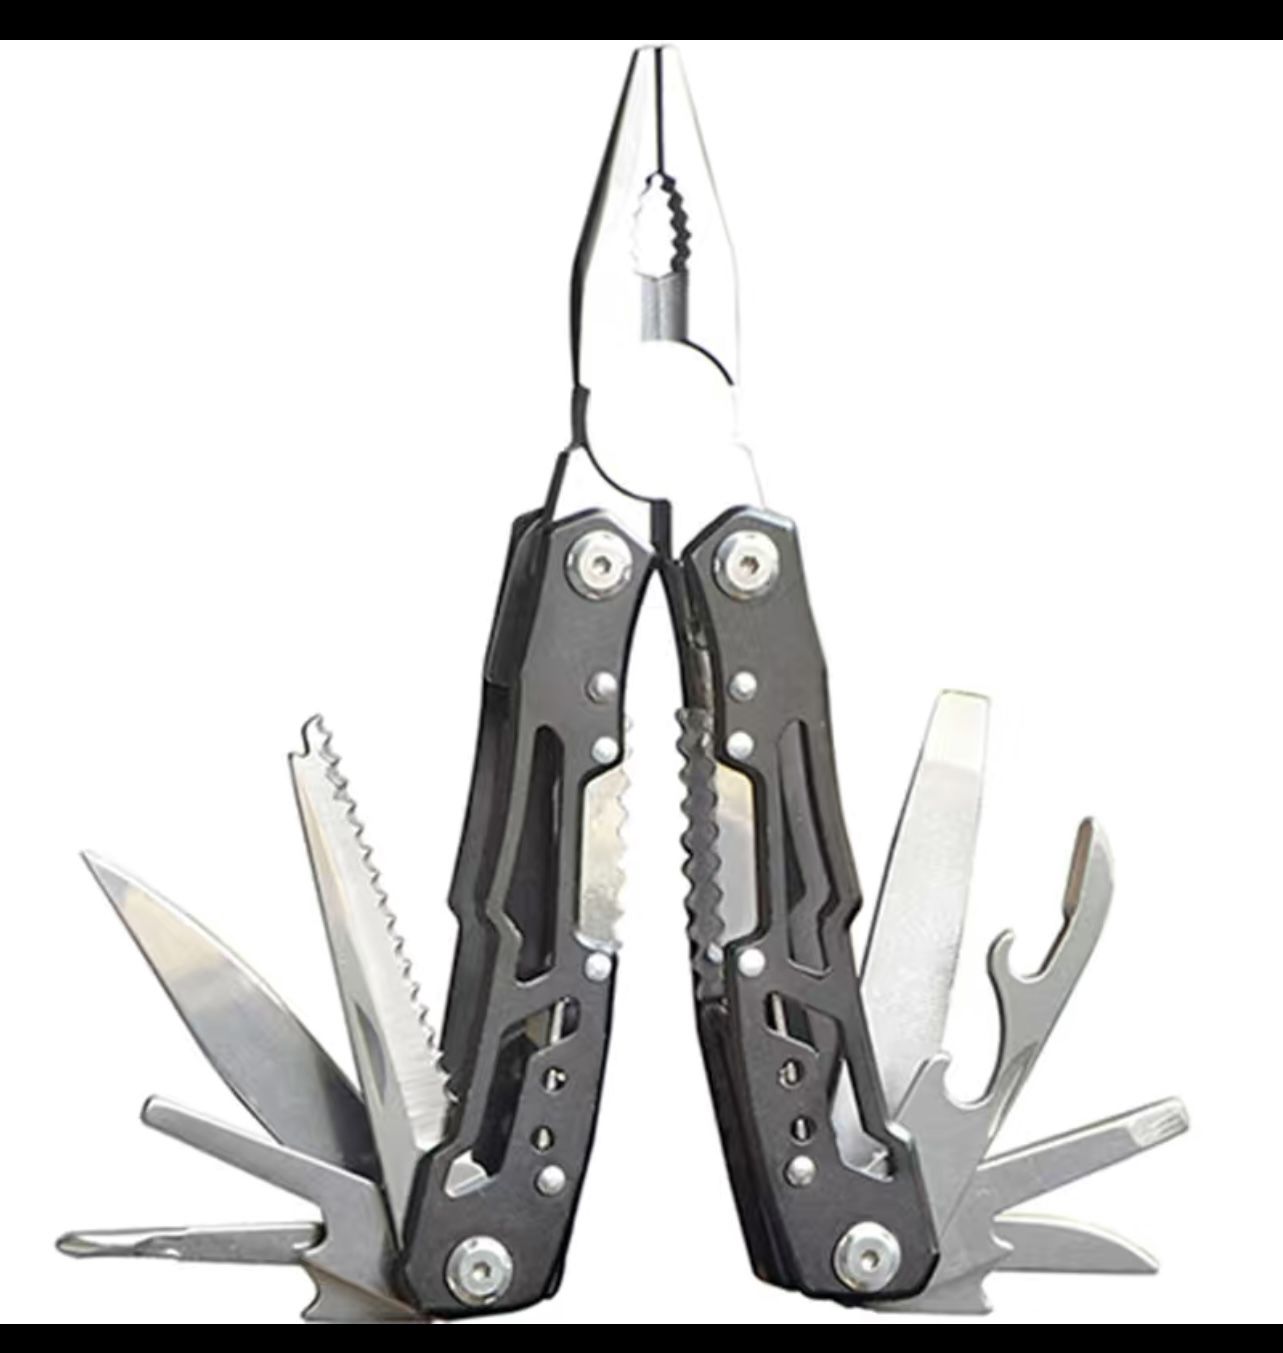 Pocket Size Multitool with Spring-Action Pliers and Saw,